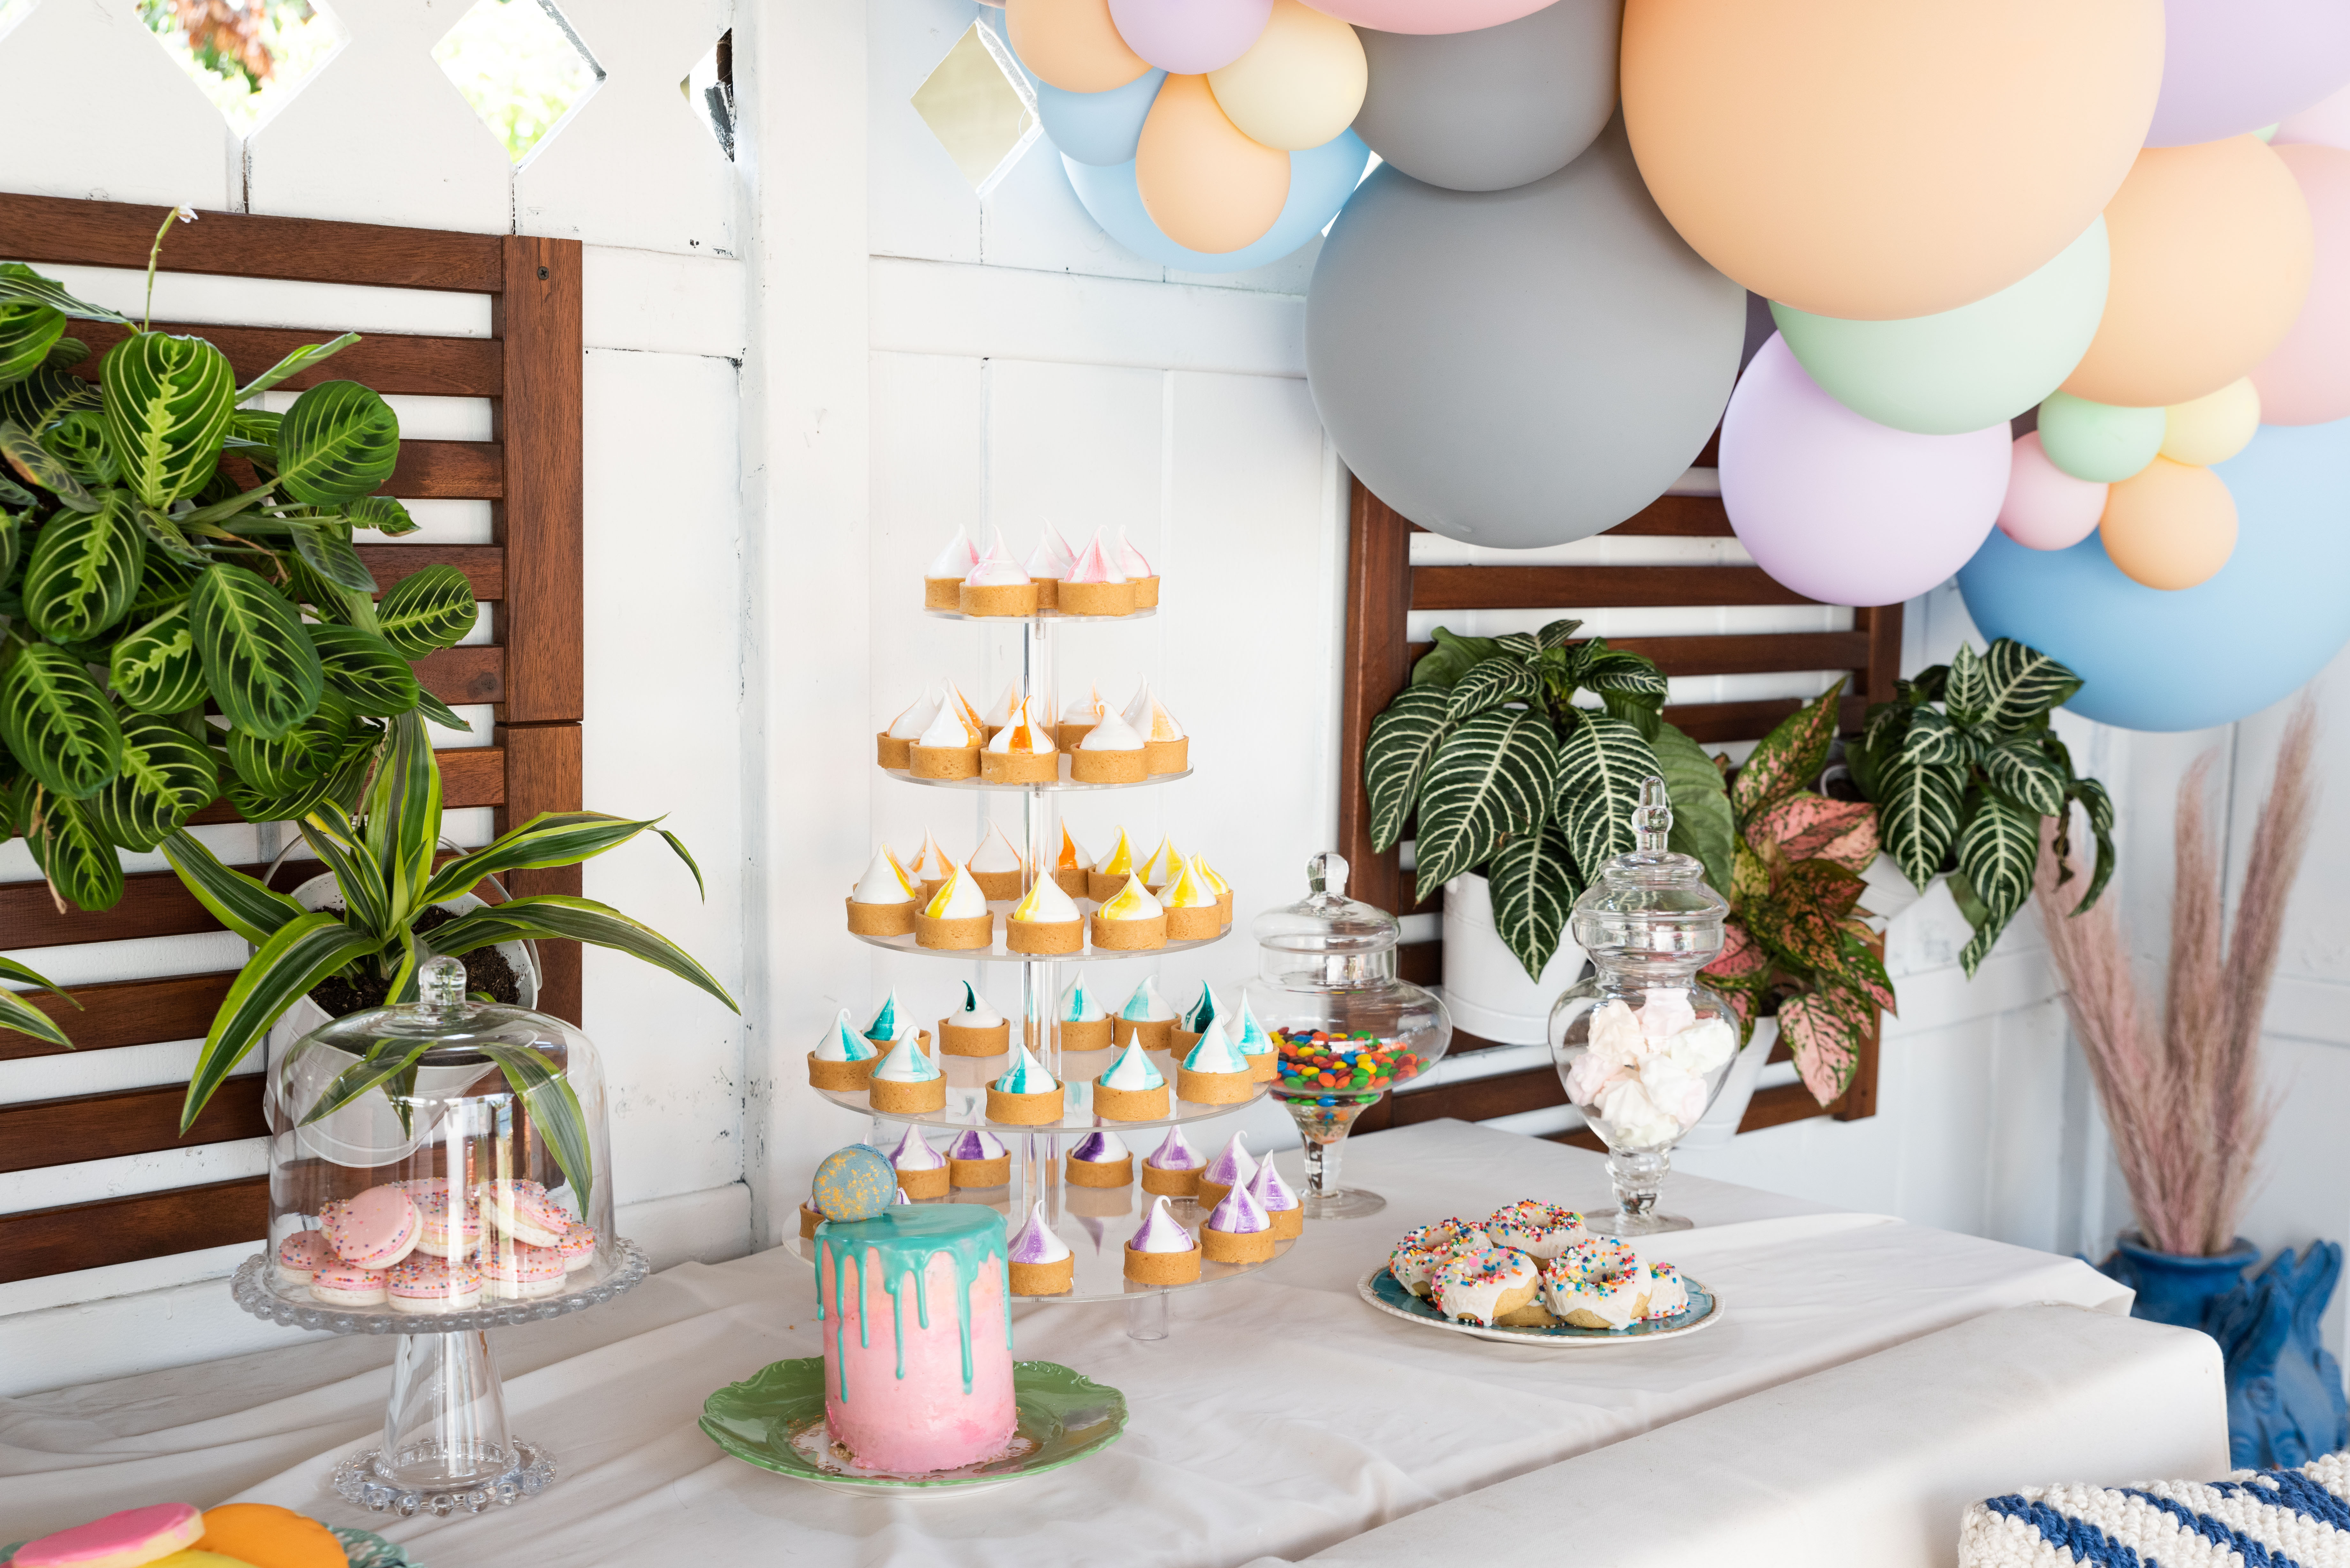 backyard bbq party
pastel party
gray malin party
event designer
fig and whiskey
dessert station
pastel balloons
party inspiration
event designer
party planner
rainbow party